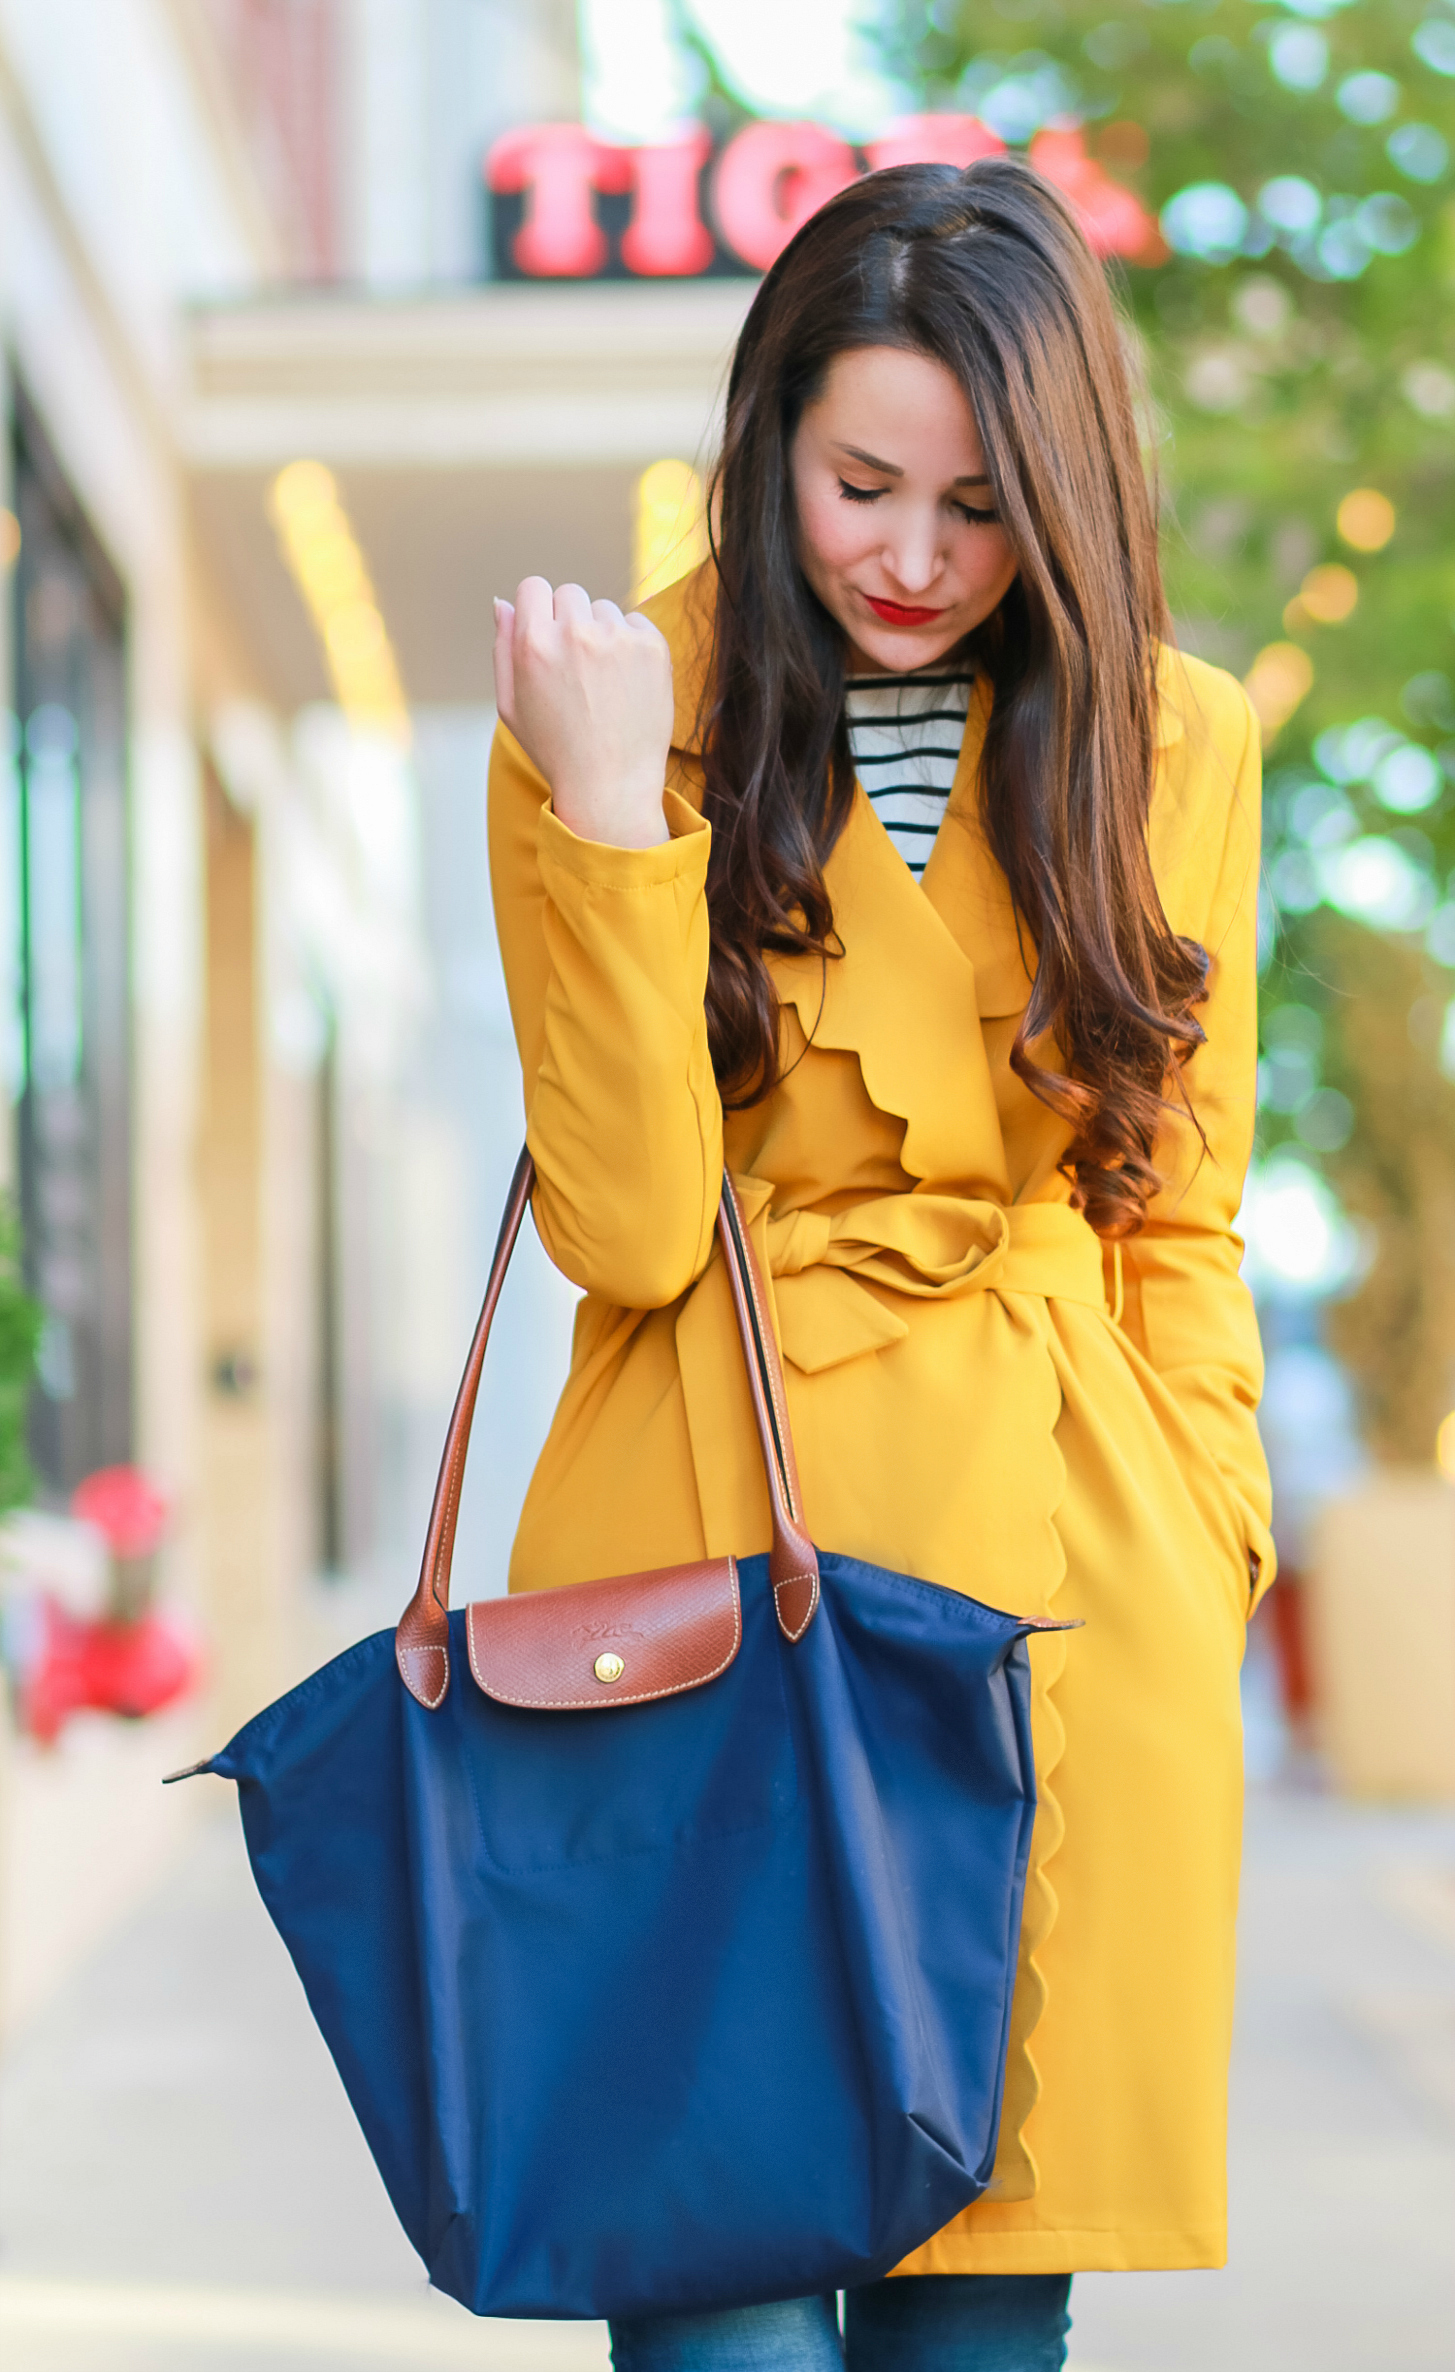 Marigold scalloped coat with AG skinny jeans, English Factory striped top, Nine West brown tall boots, and large navy Longchamp tote | Color Crush: Marigold Scalloped Coat by fashion blogger Stephanie Ziajka from Diary of a Debutante